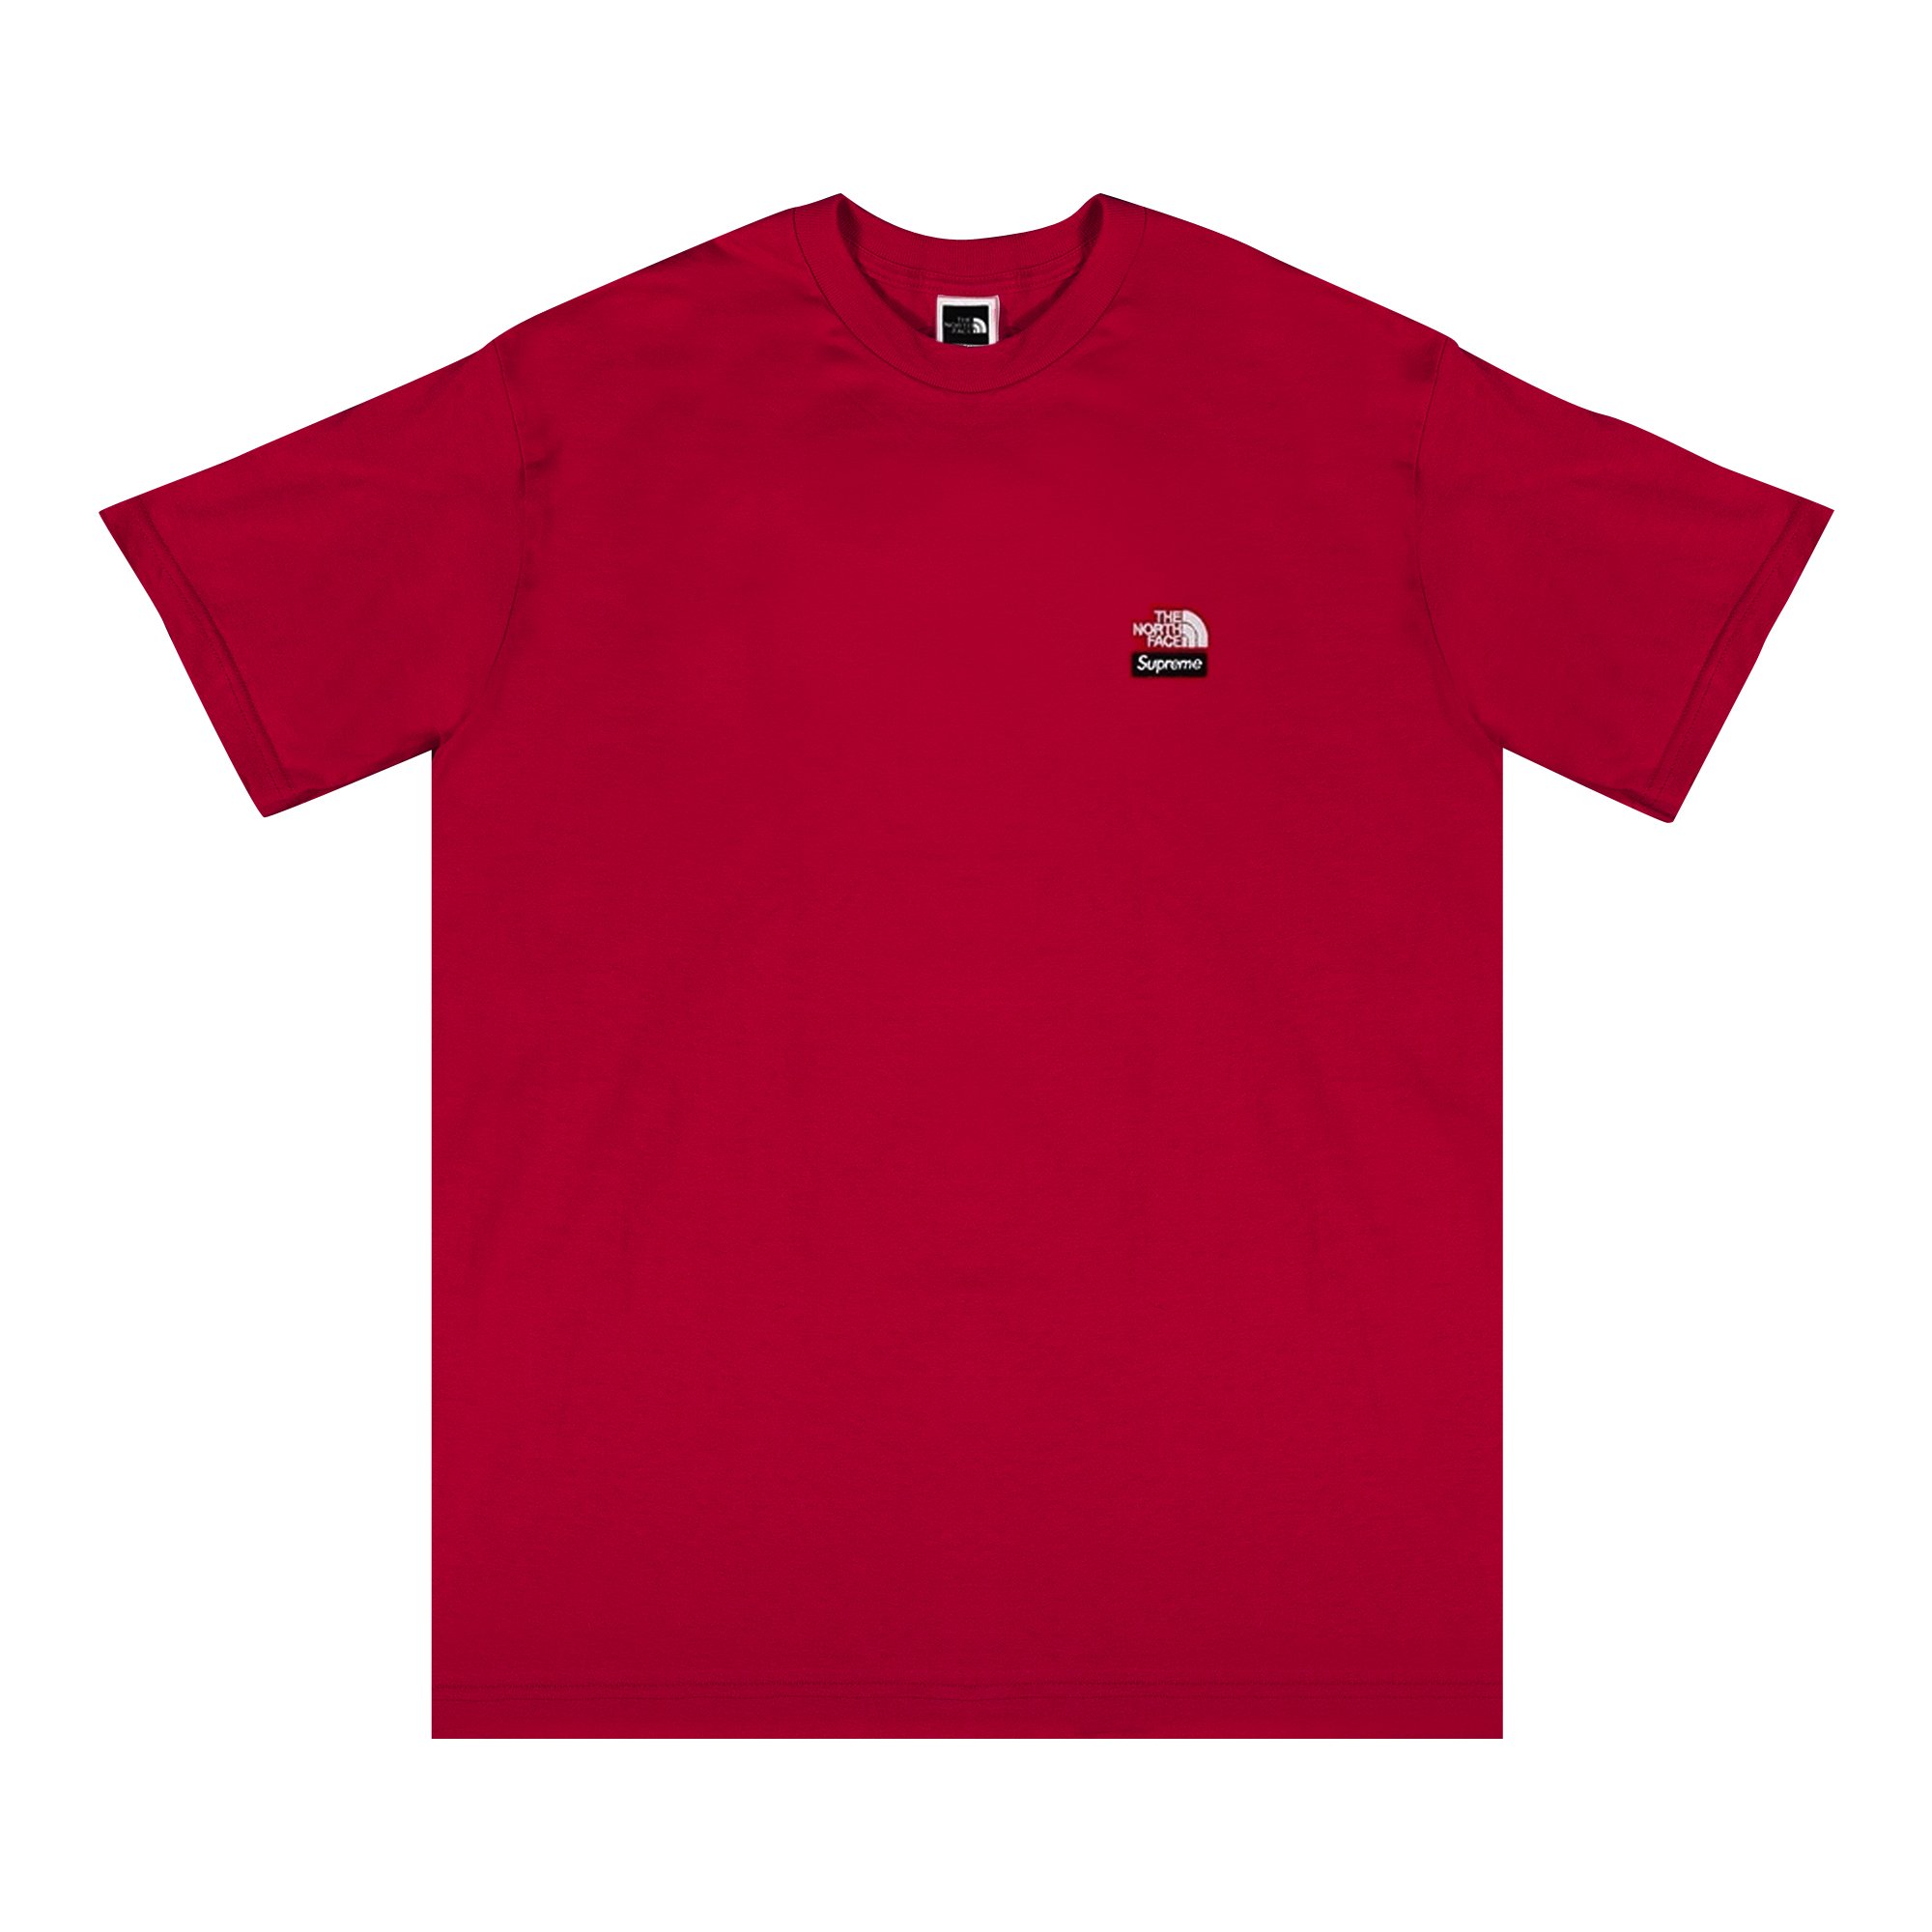 Buy Supreme x The North Face Bandana Tee 'Red' - SS22KN4 RED | GOAT